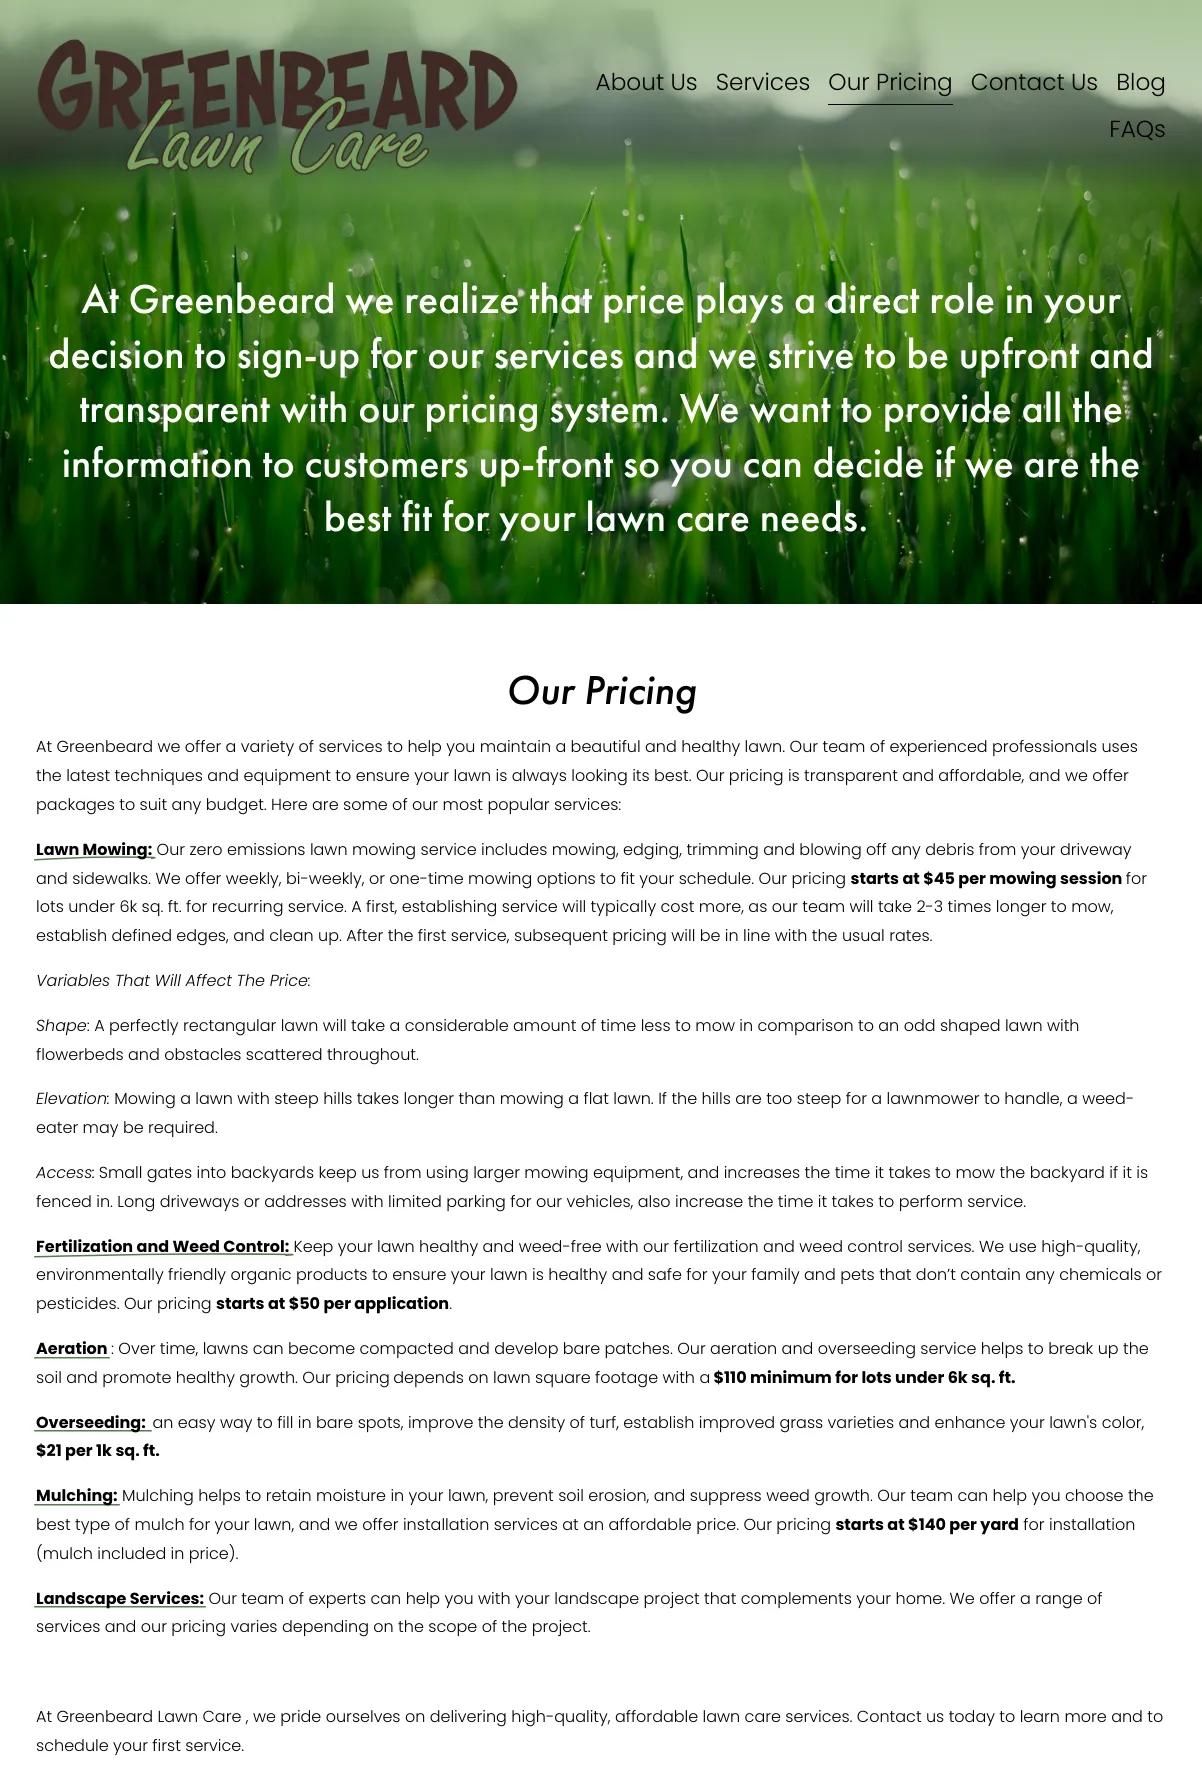 Screenshot 3 of Greenbeard Lawn Care (Example Squarespace Lawn Care Website)